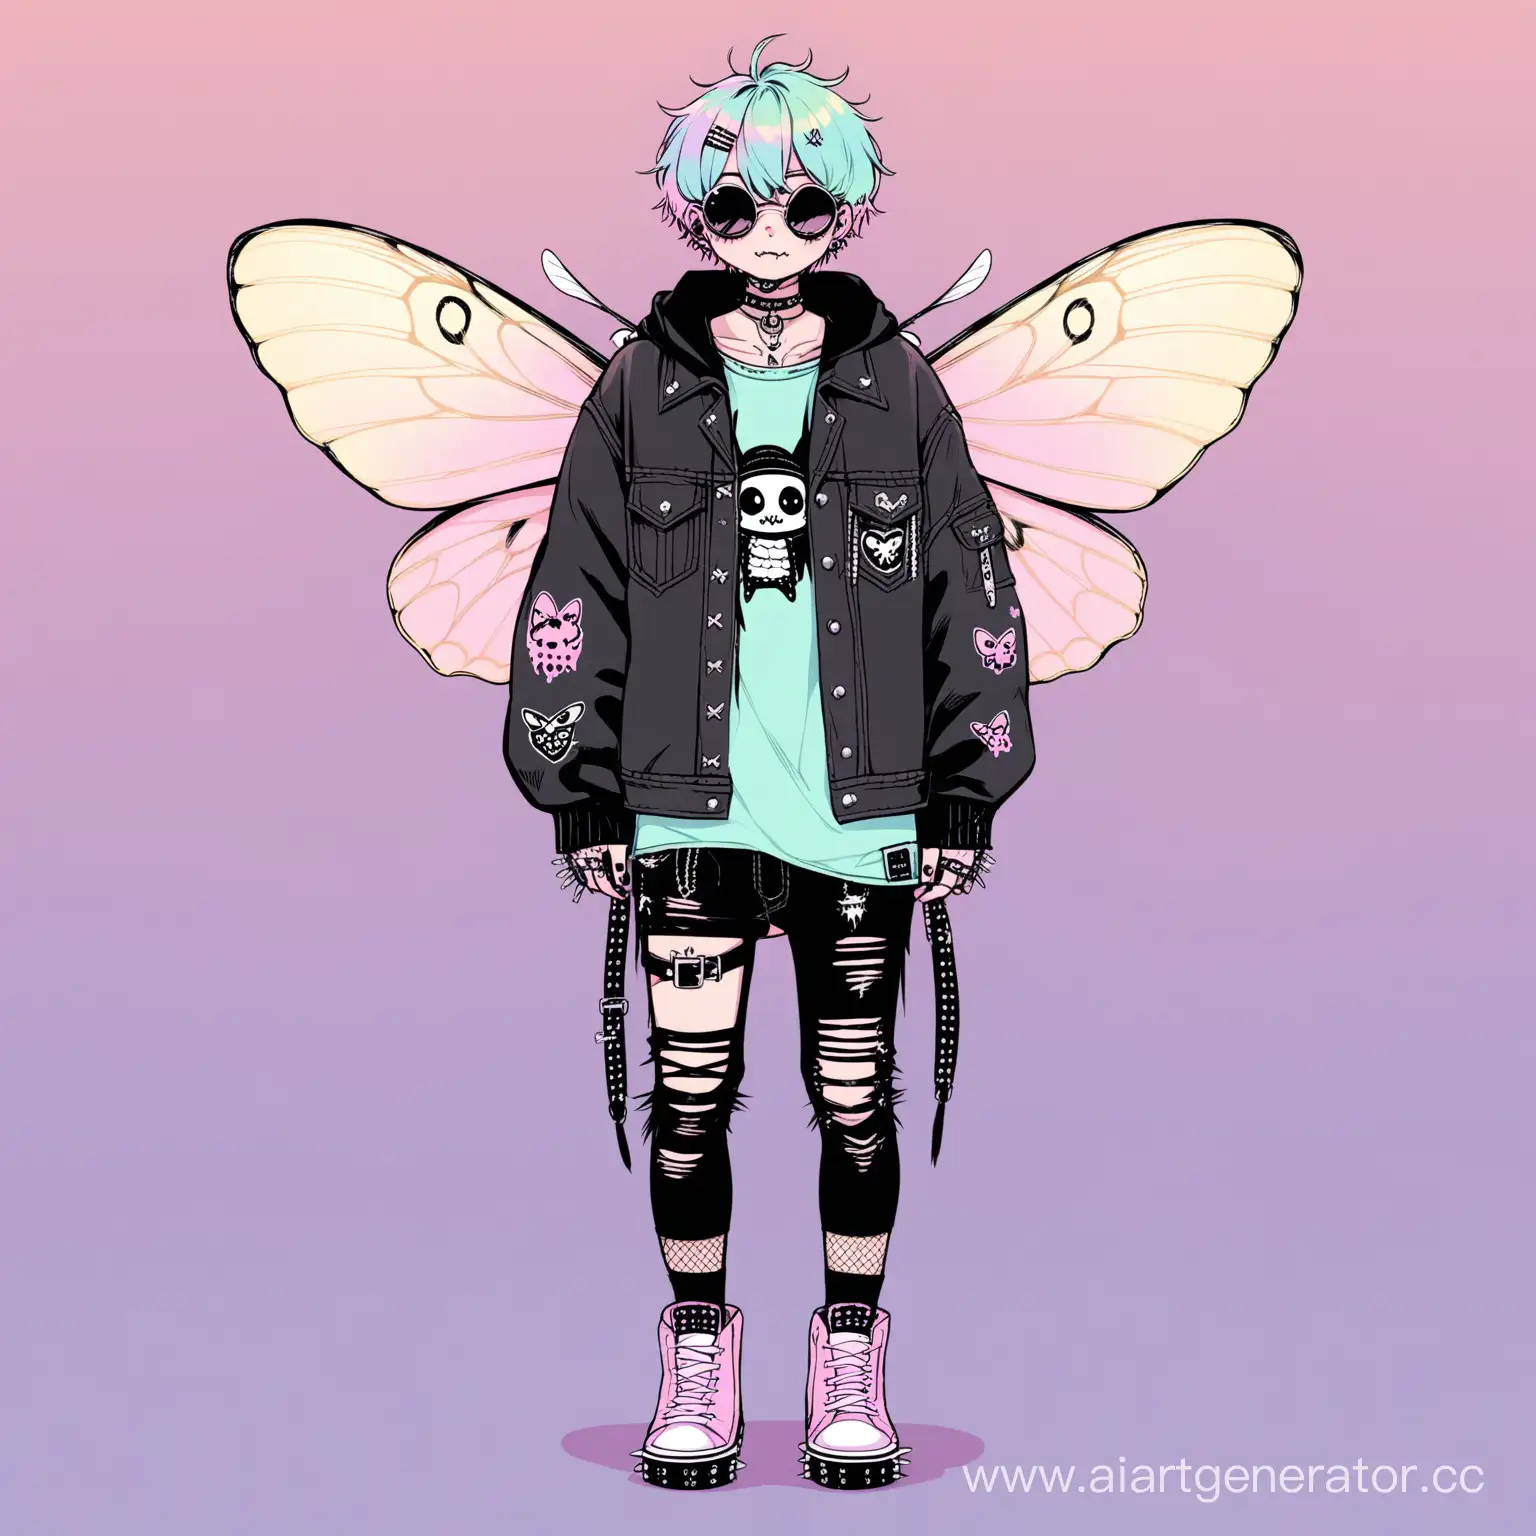 Cheeky-Moth-Guy-with-Short-Hair-in-Pastel-Punk-Grunge-Fashion